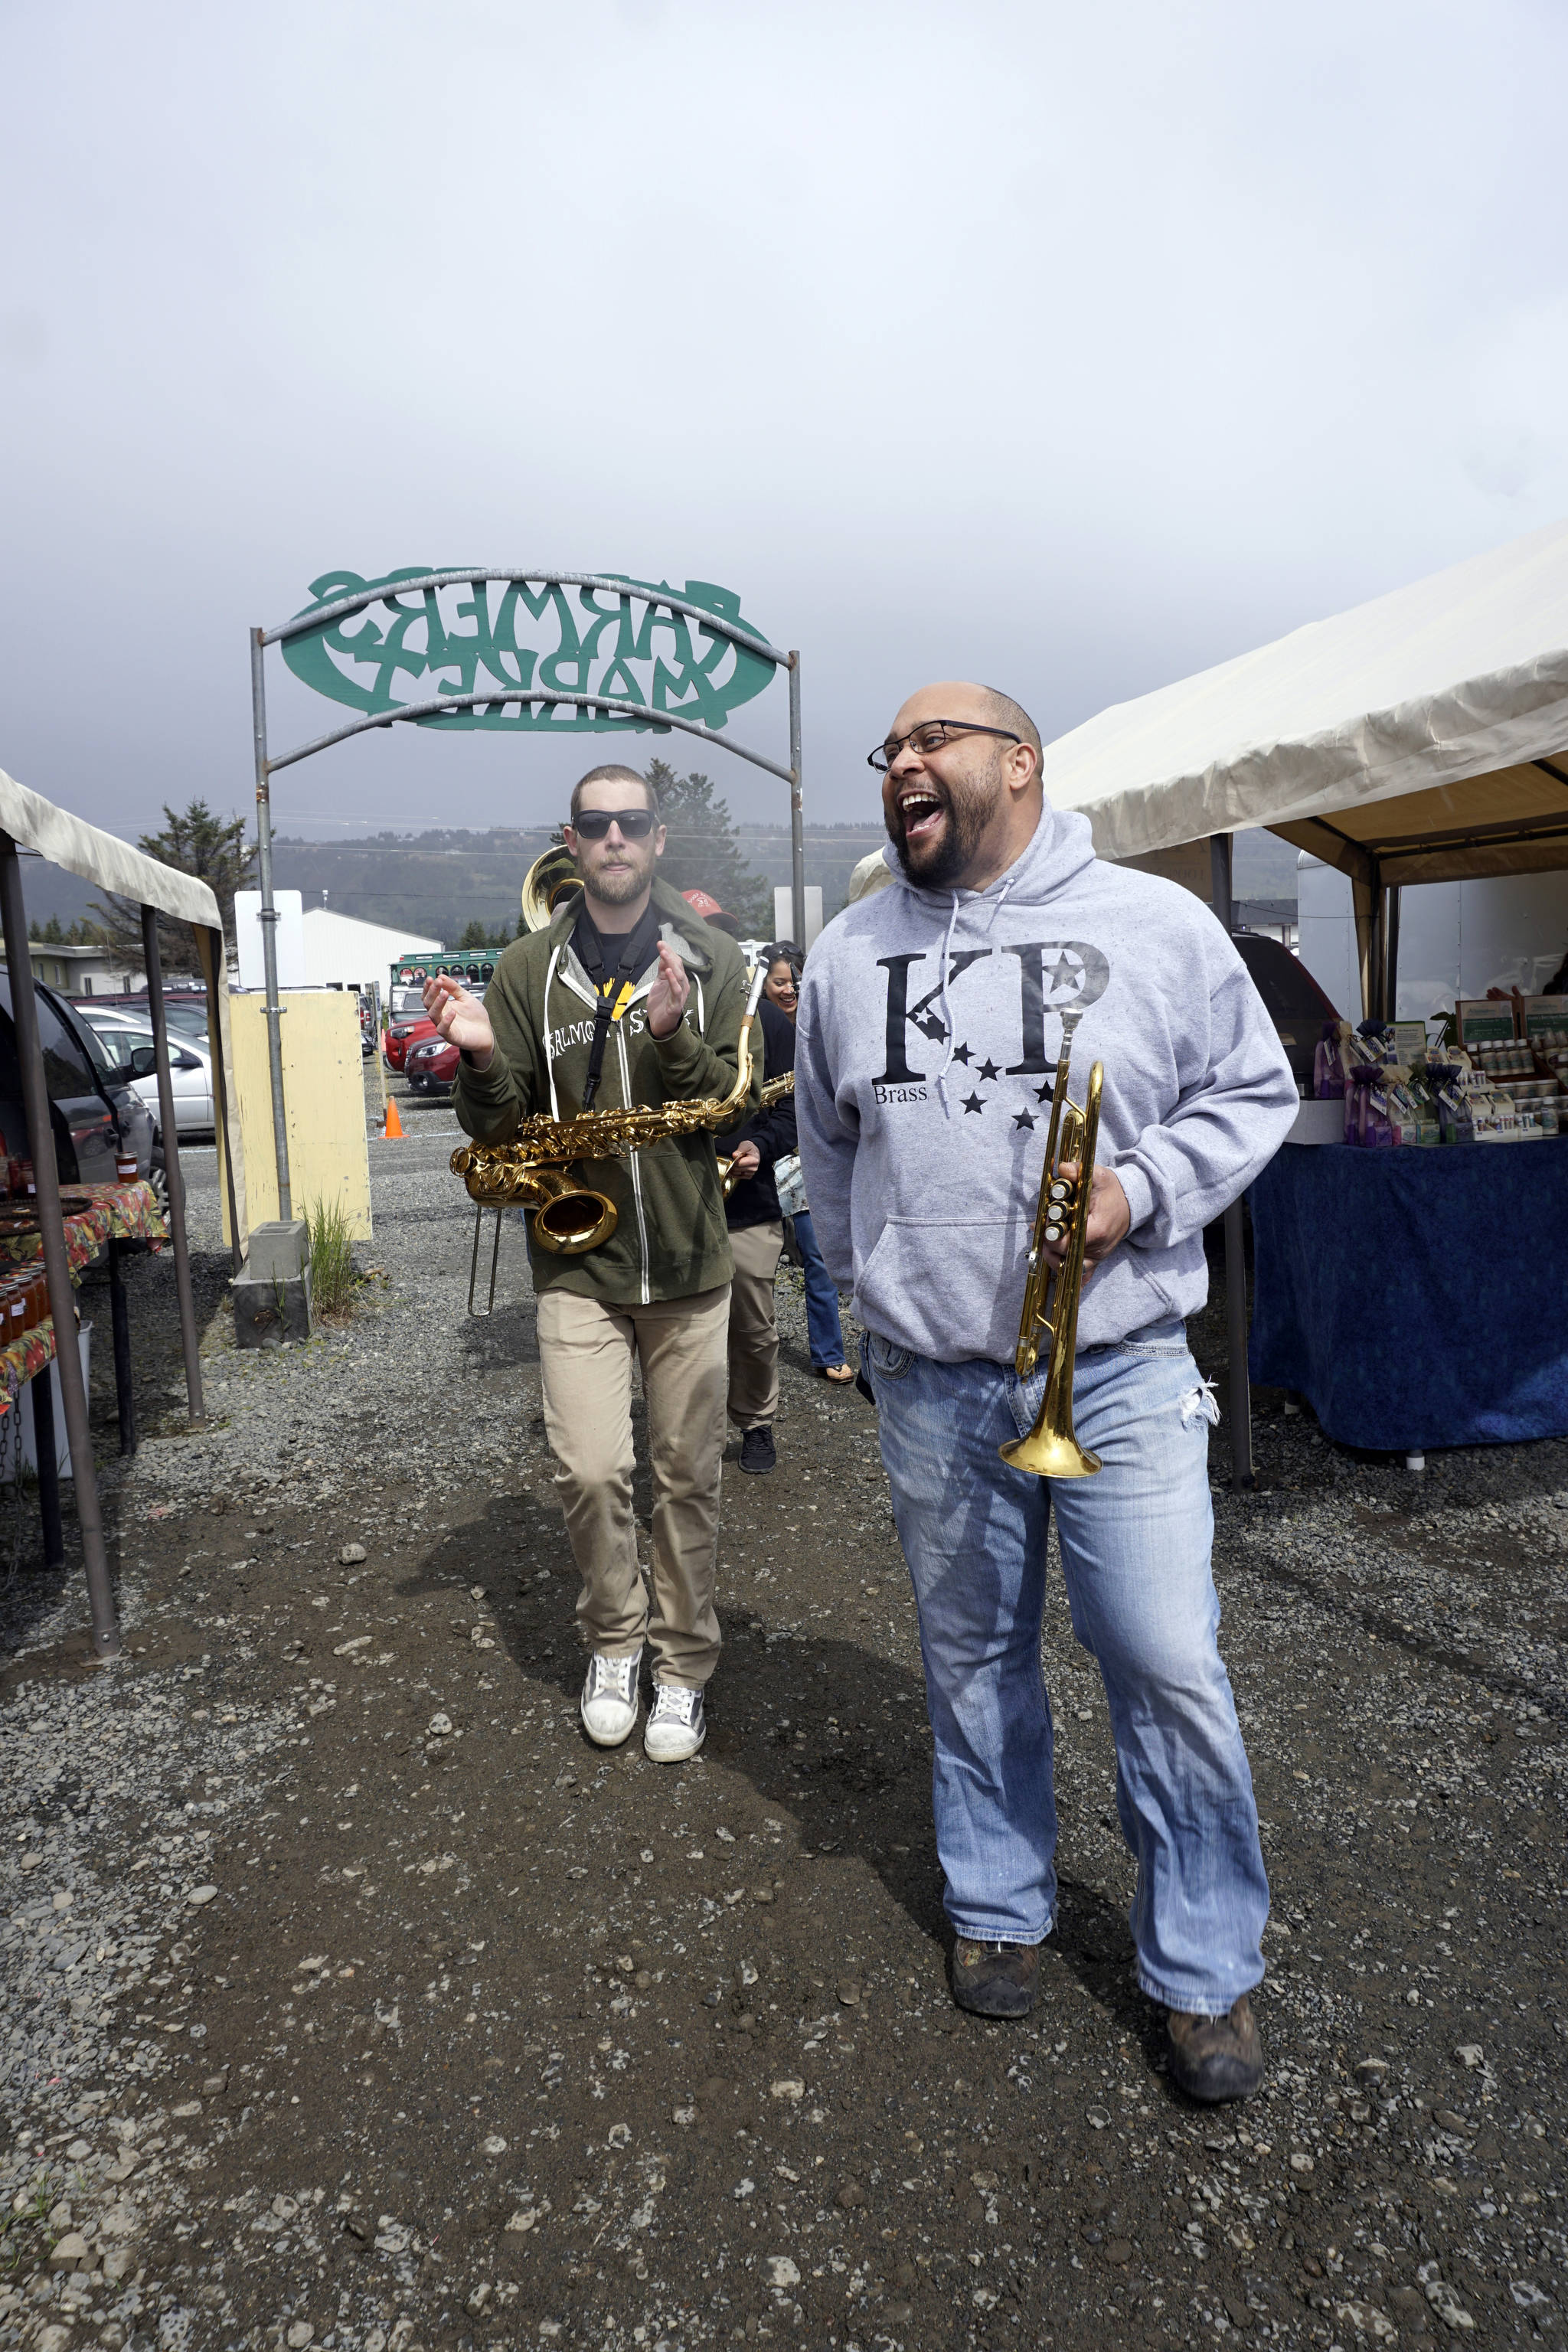 Nelton Palma marches with the KP Brass Band at the Homer Farmers Market for opening day on May 26, 2018. (Photo by Michael Armstrong/Homer News)